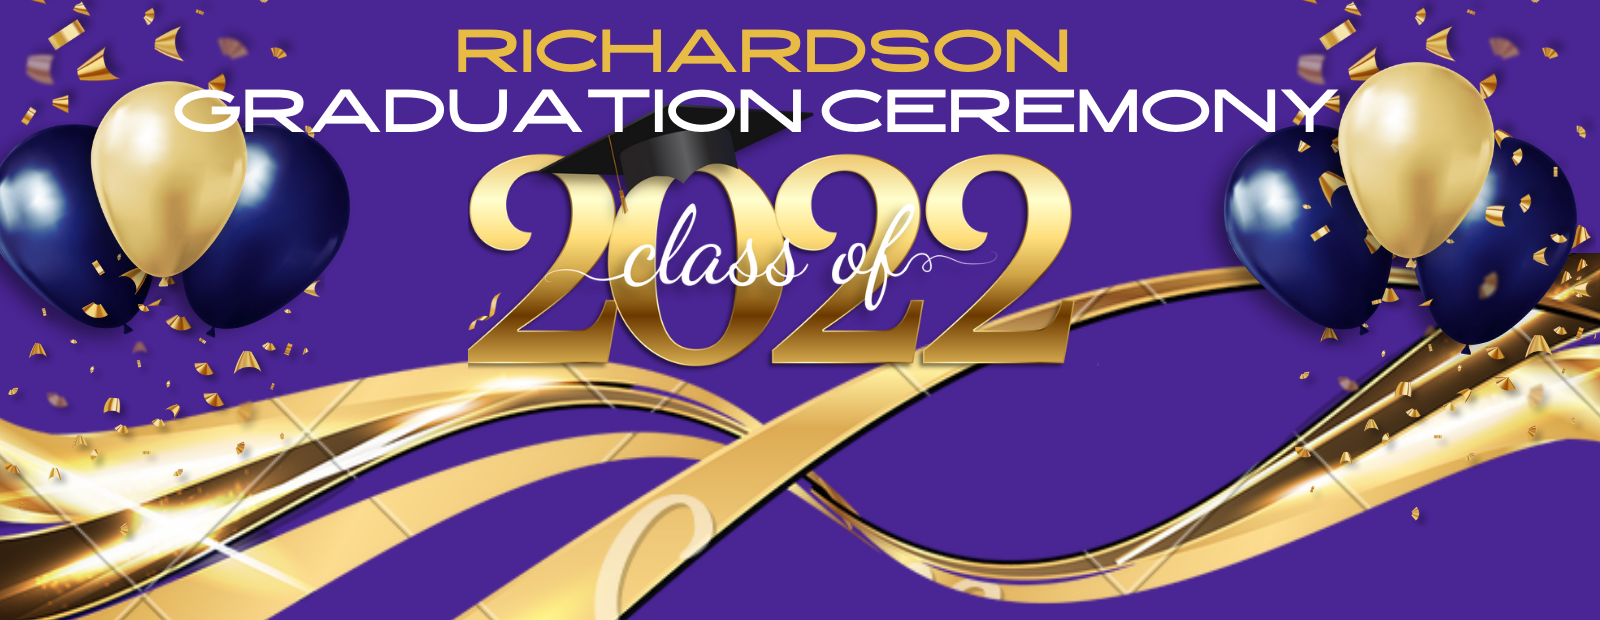 Purple and Gold Banner, need to click to see information on 2022 Graduation Ceremony